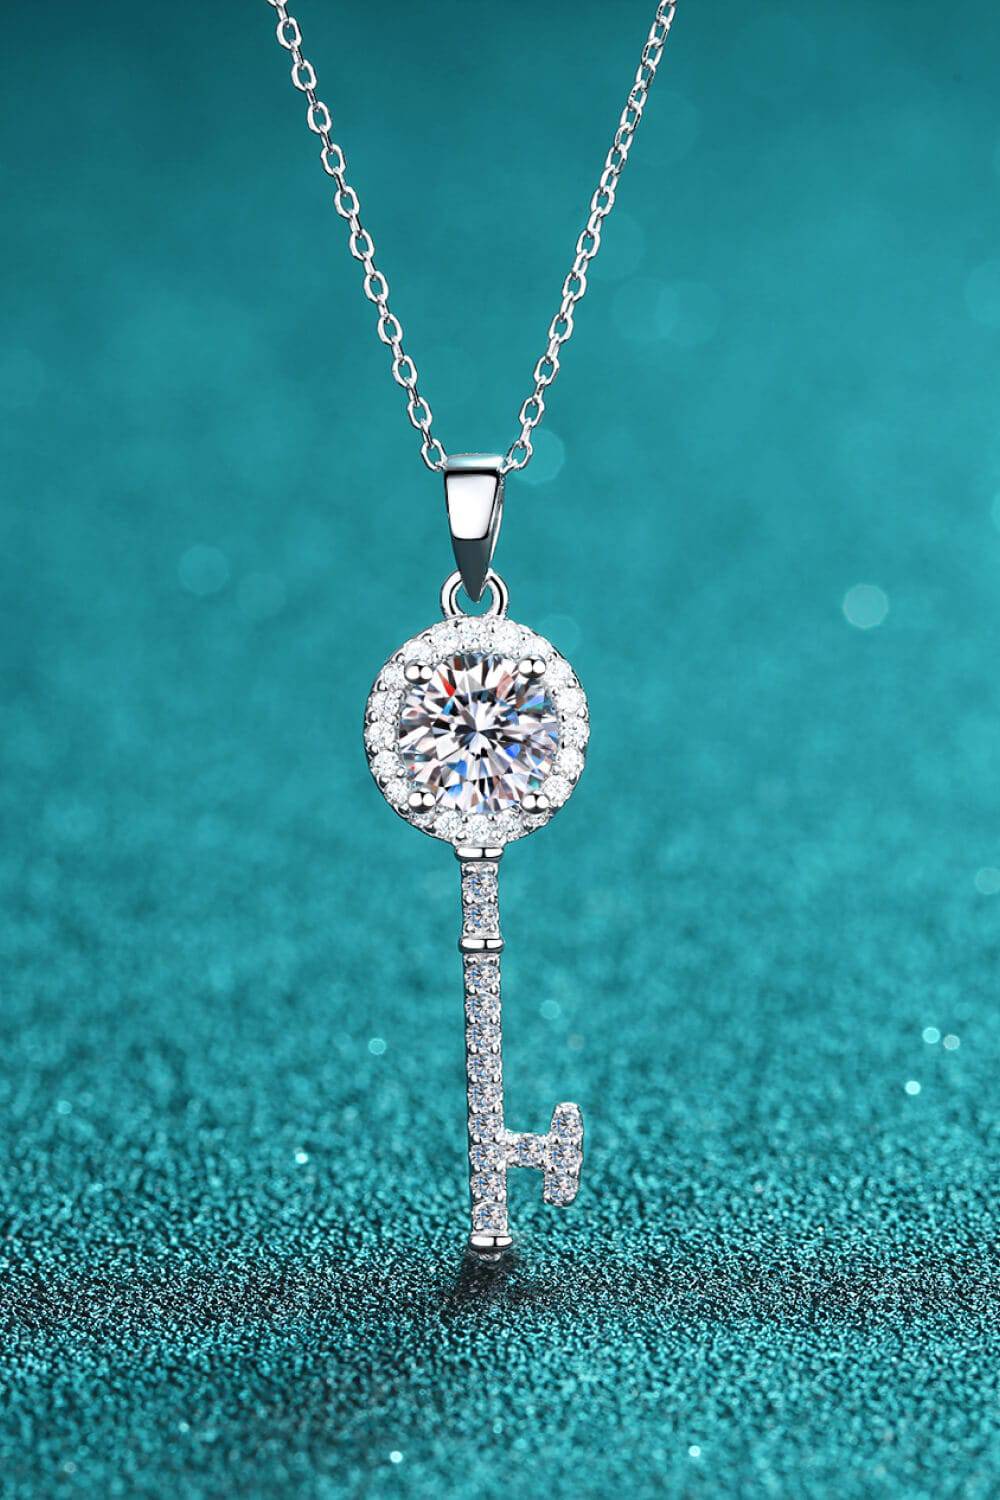 Unlock Love's Embrace - Wear the Moissanite Key Pendant Necklace and Ignite Your Passion. - Guy Christopher 